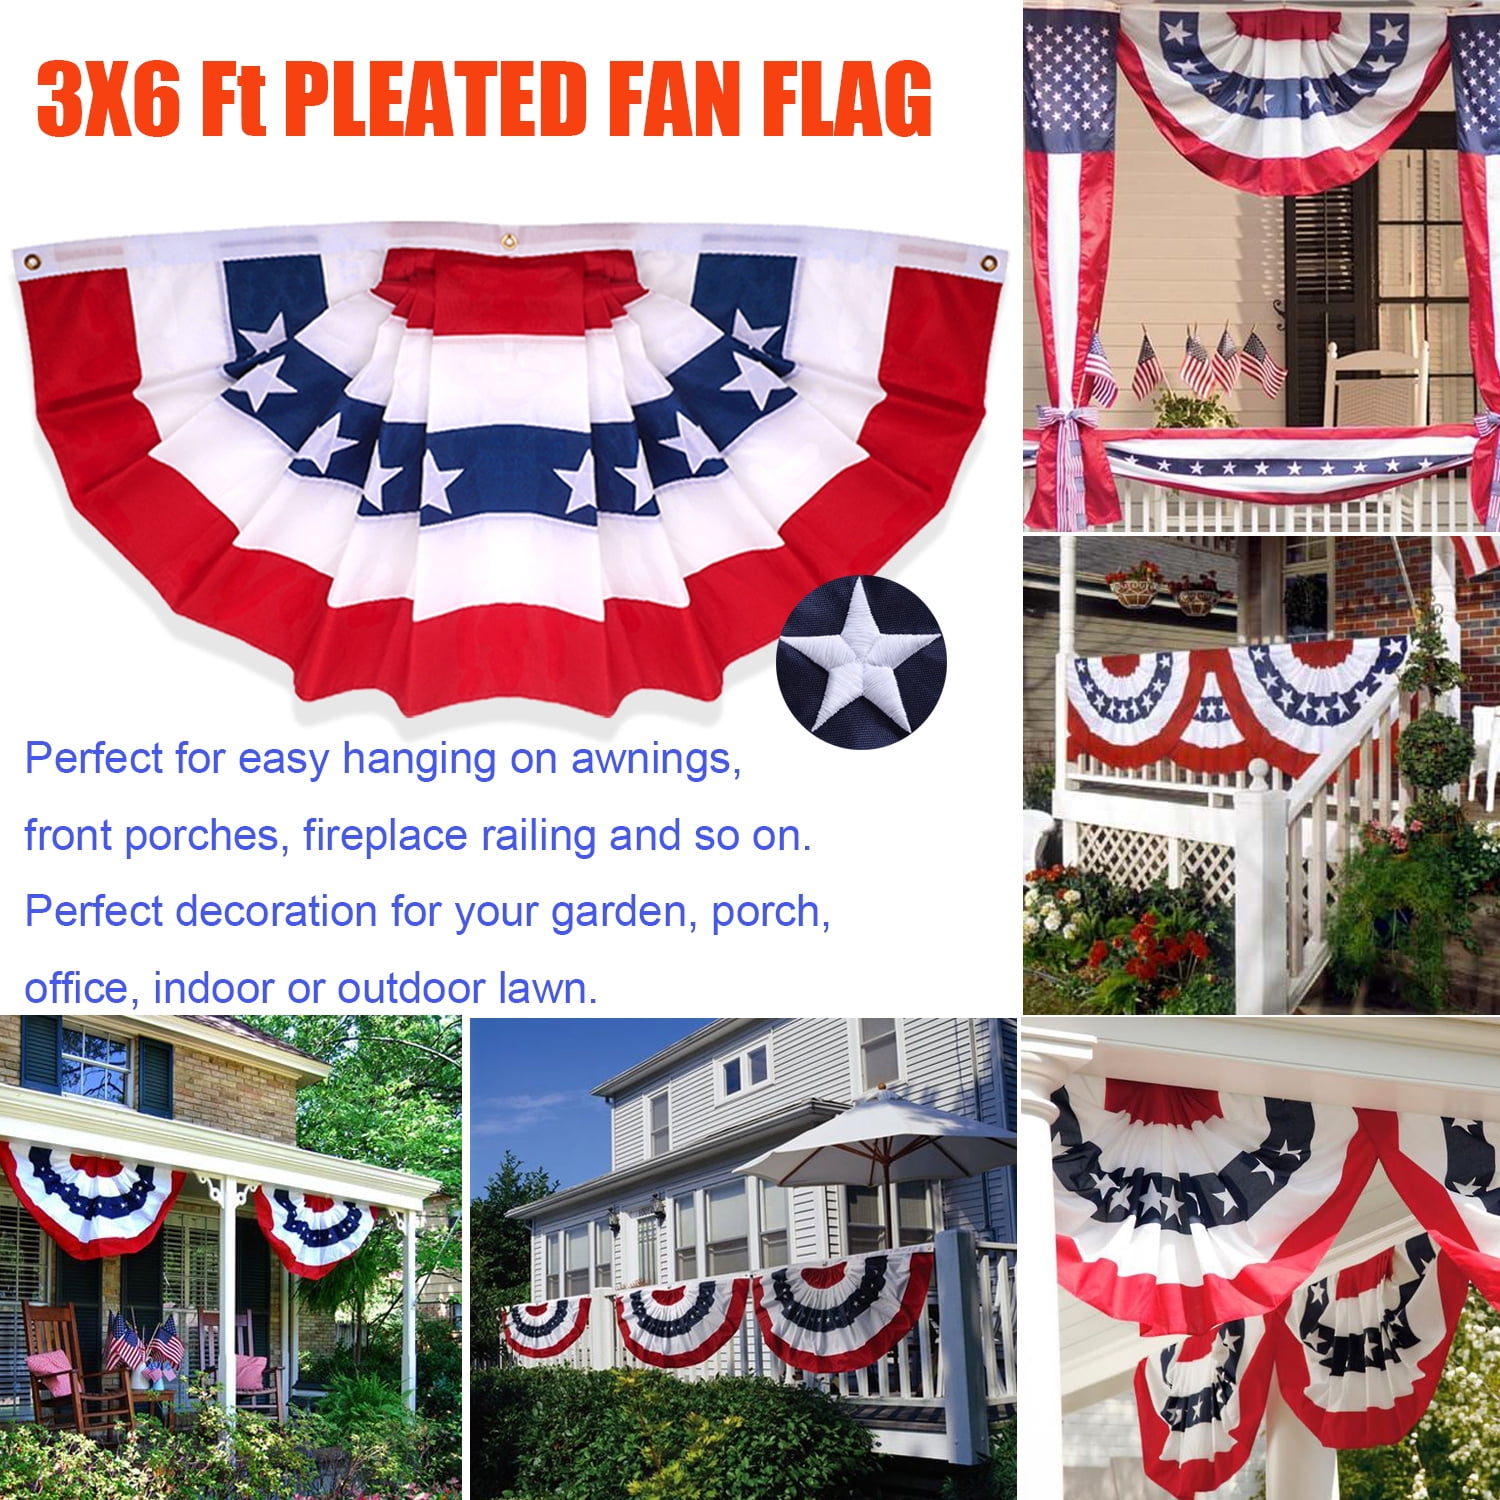 American Pleated Fan Flag USA American Bunting Decoration Lo HH